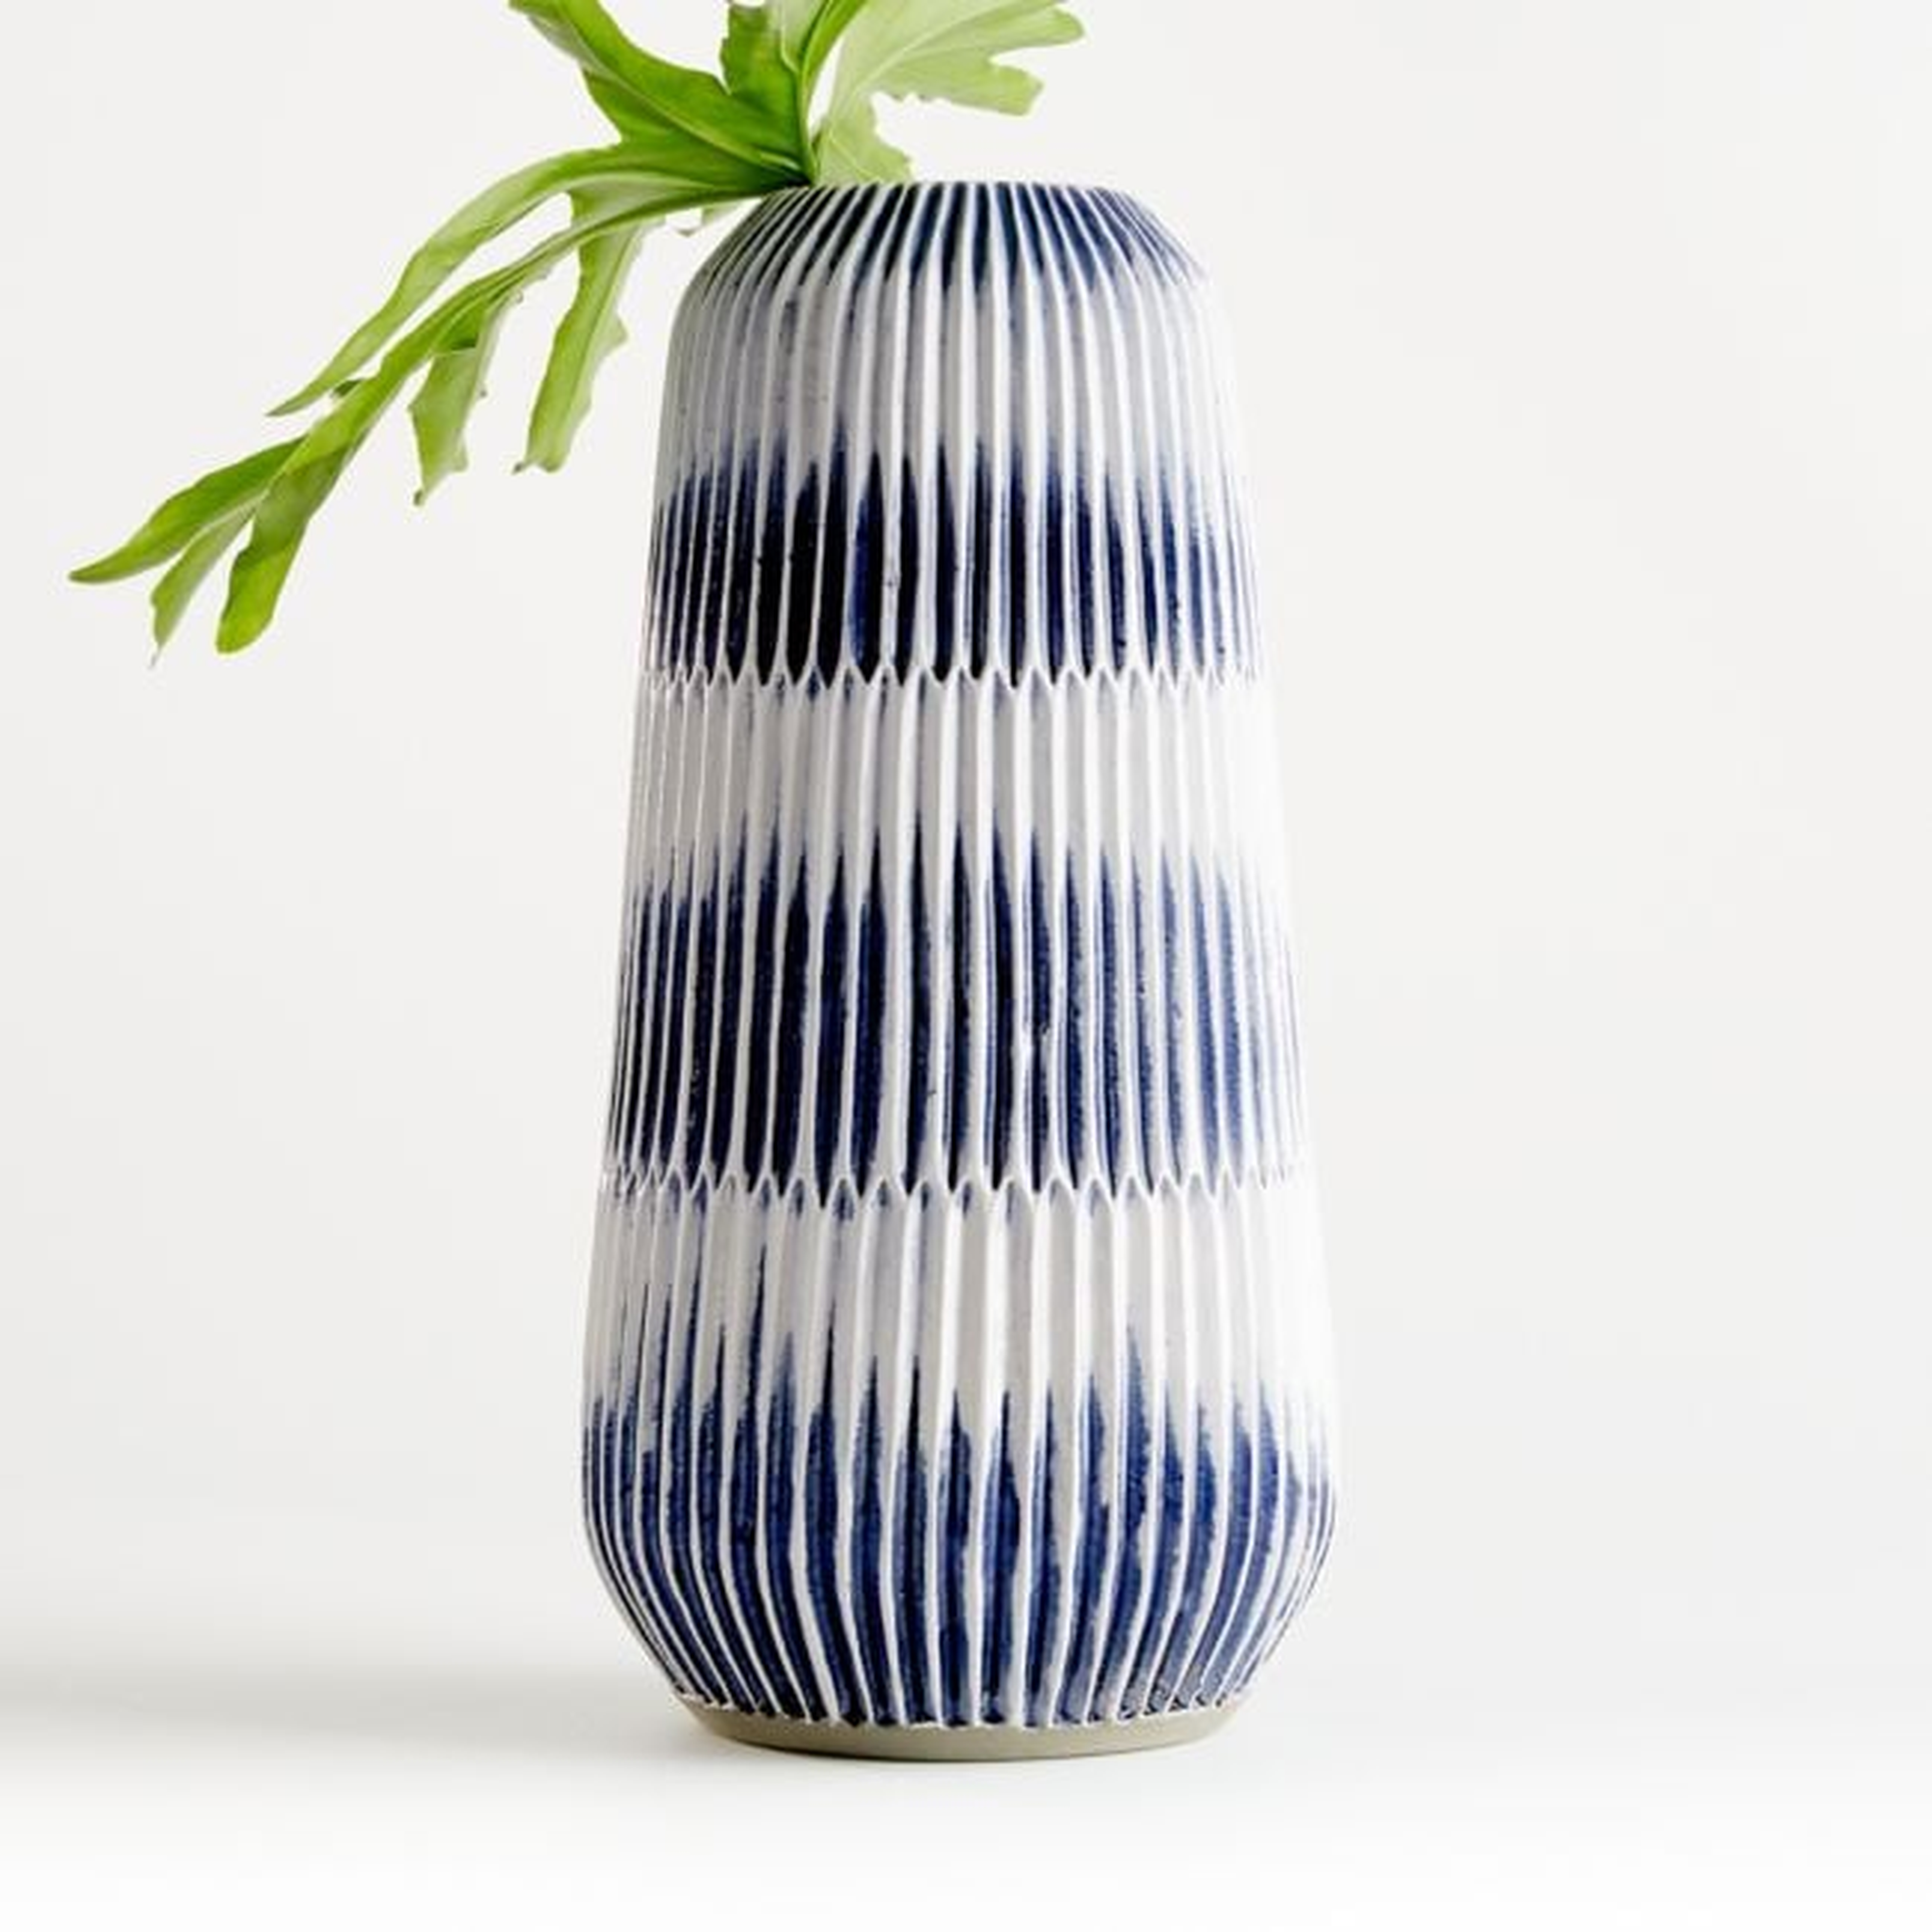 Piega Large Blue and White Vase - Crate and Barrel